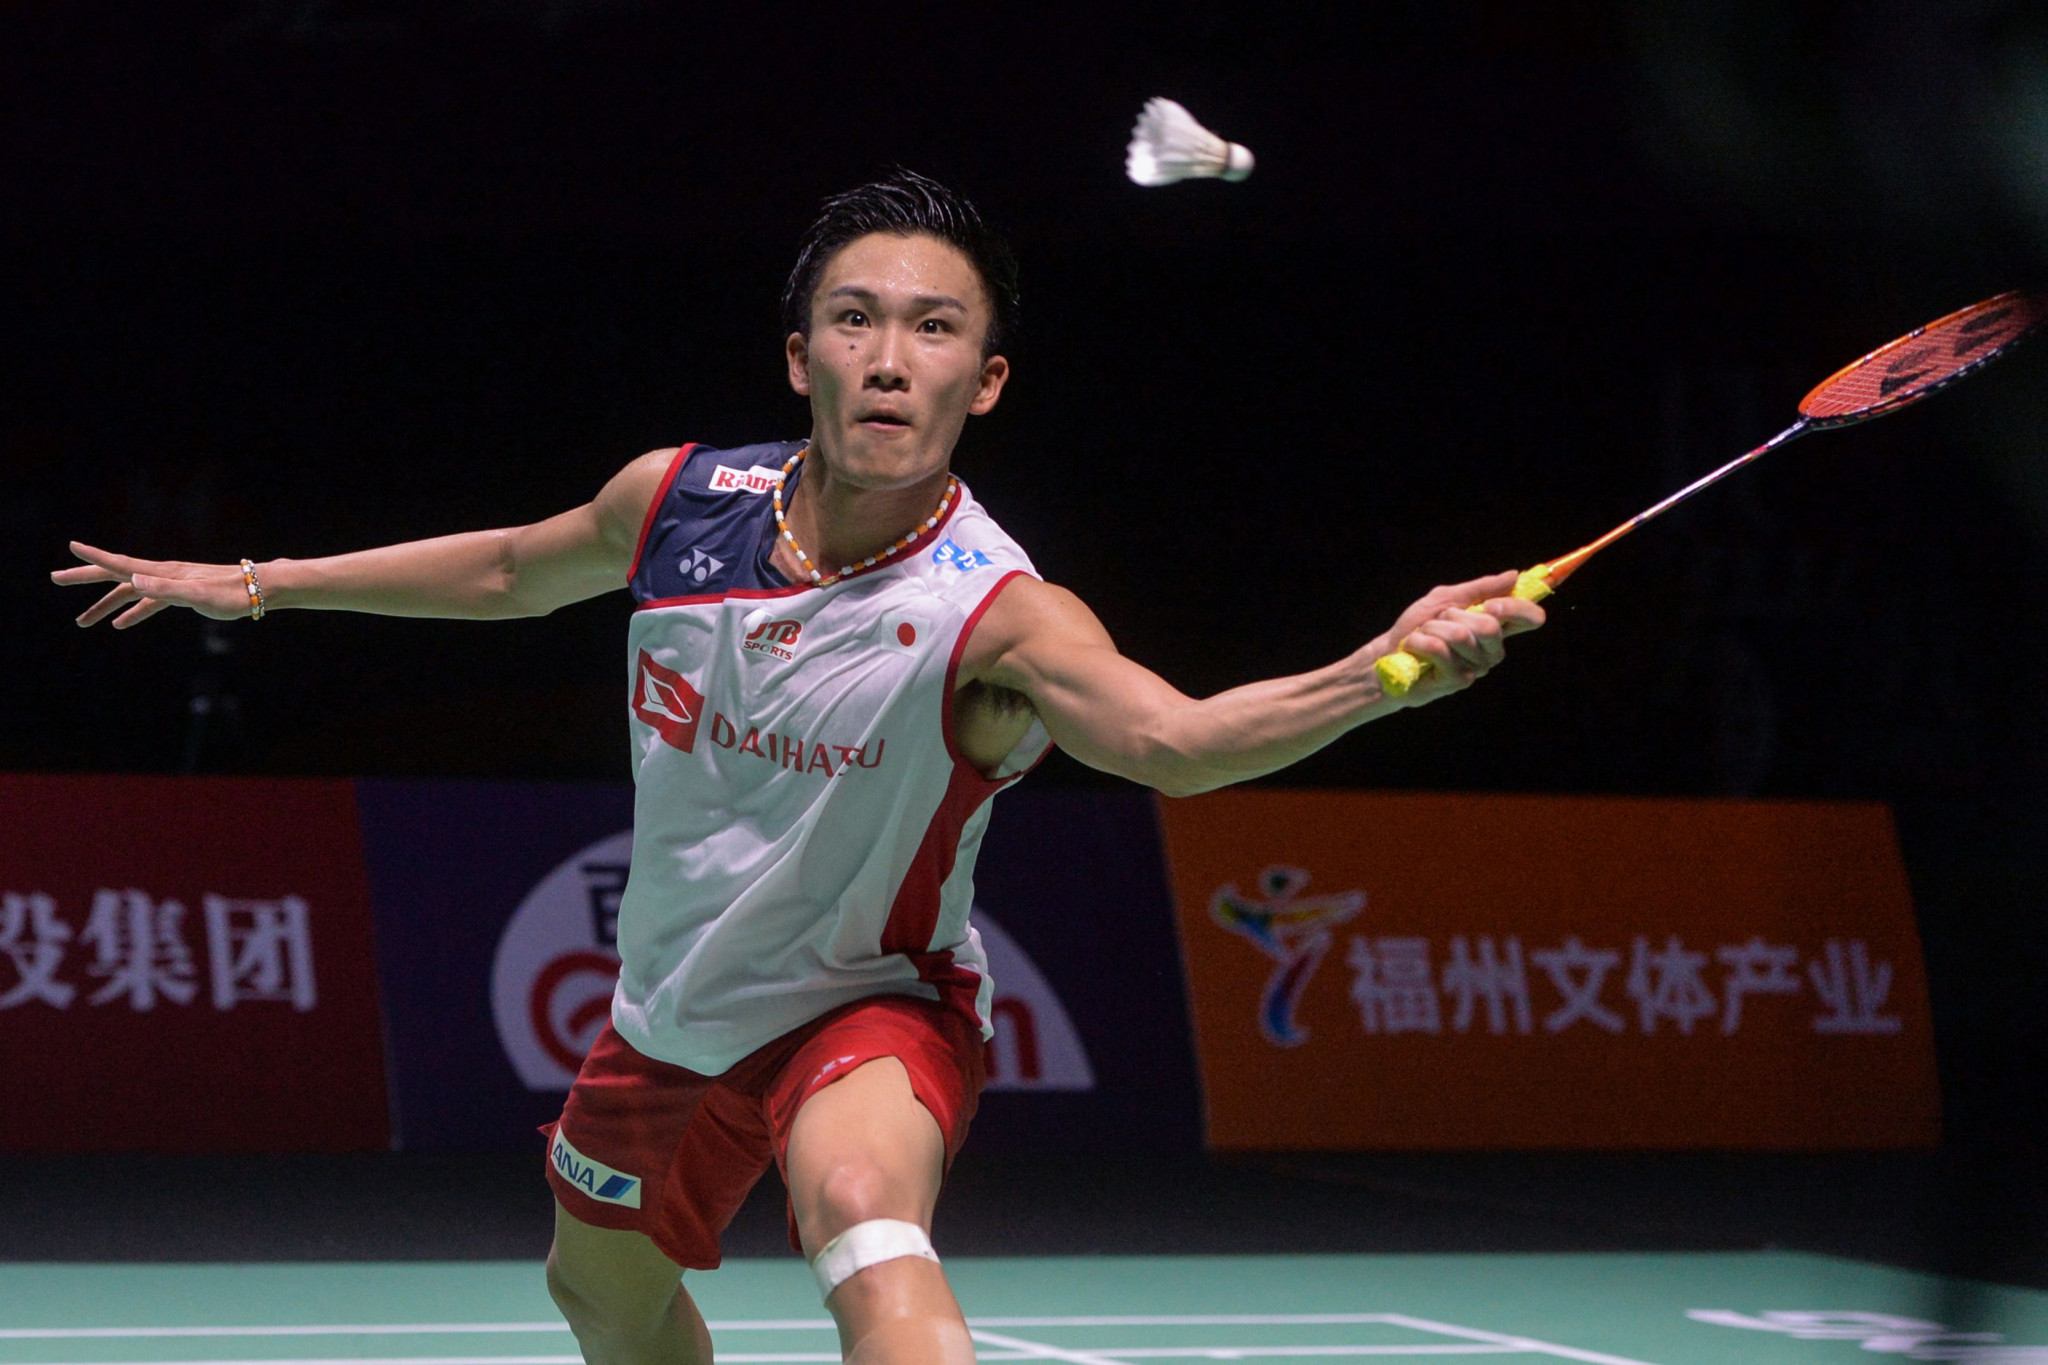 Japan's Kento Momota has won four BWF World Tour titles this year already, been crowned world champion and is now in the quarter-finals of the Hong Kong Open ©Getty Images